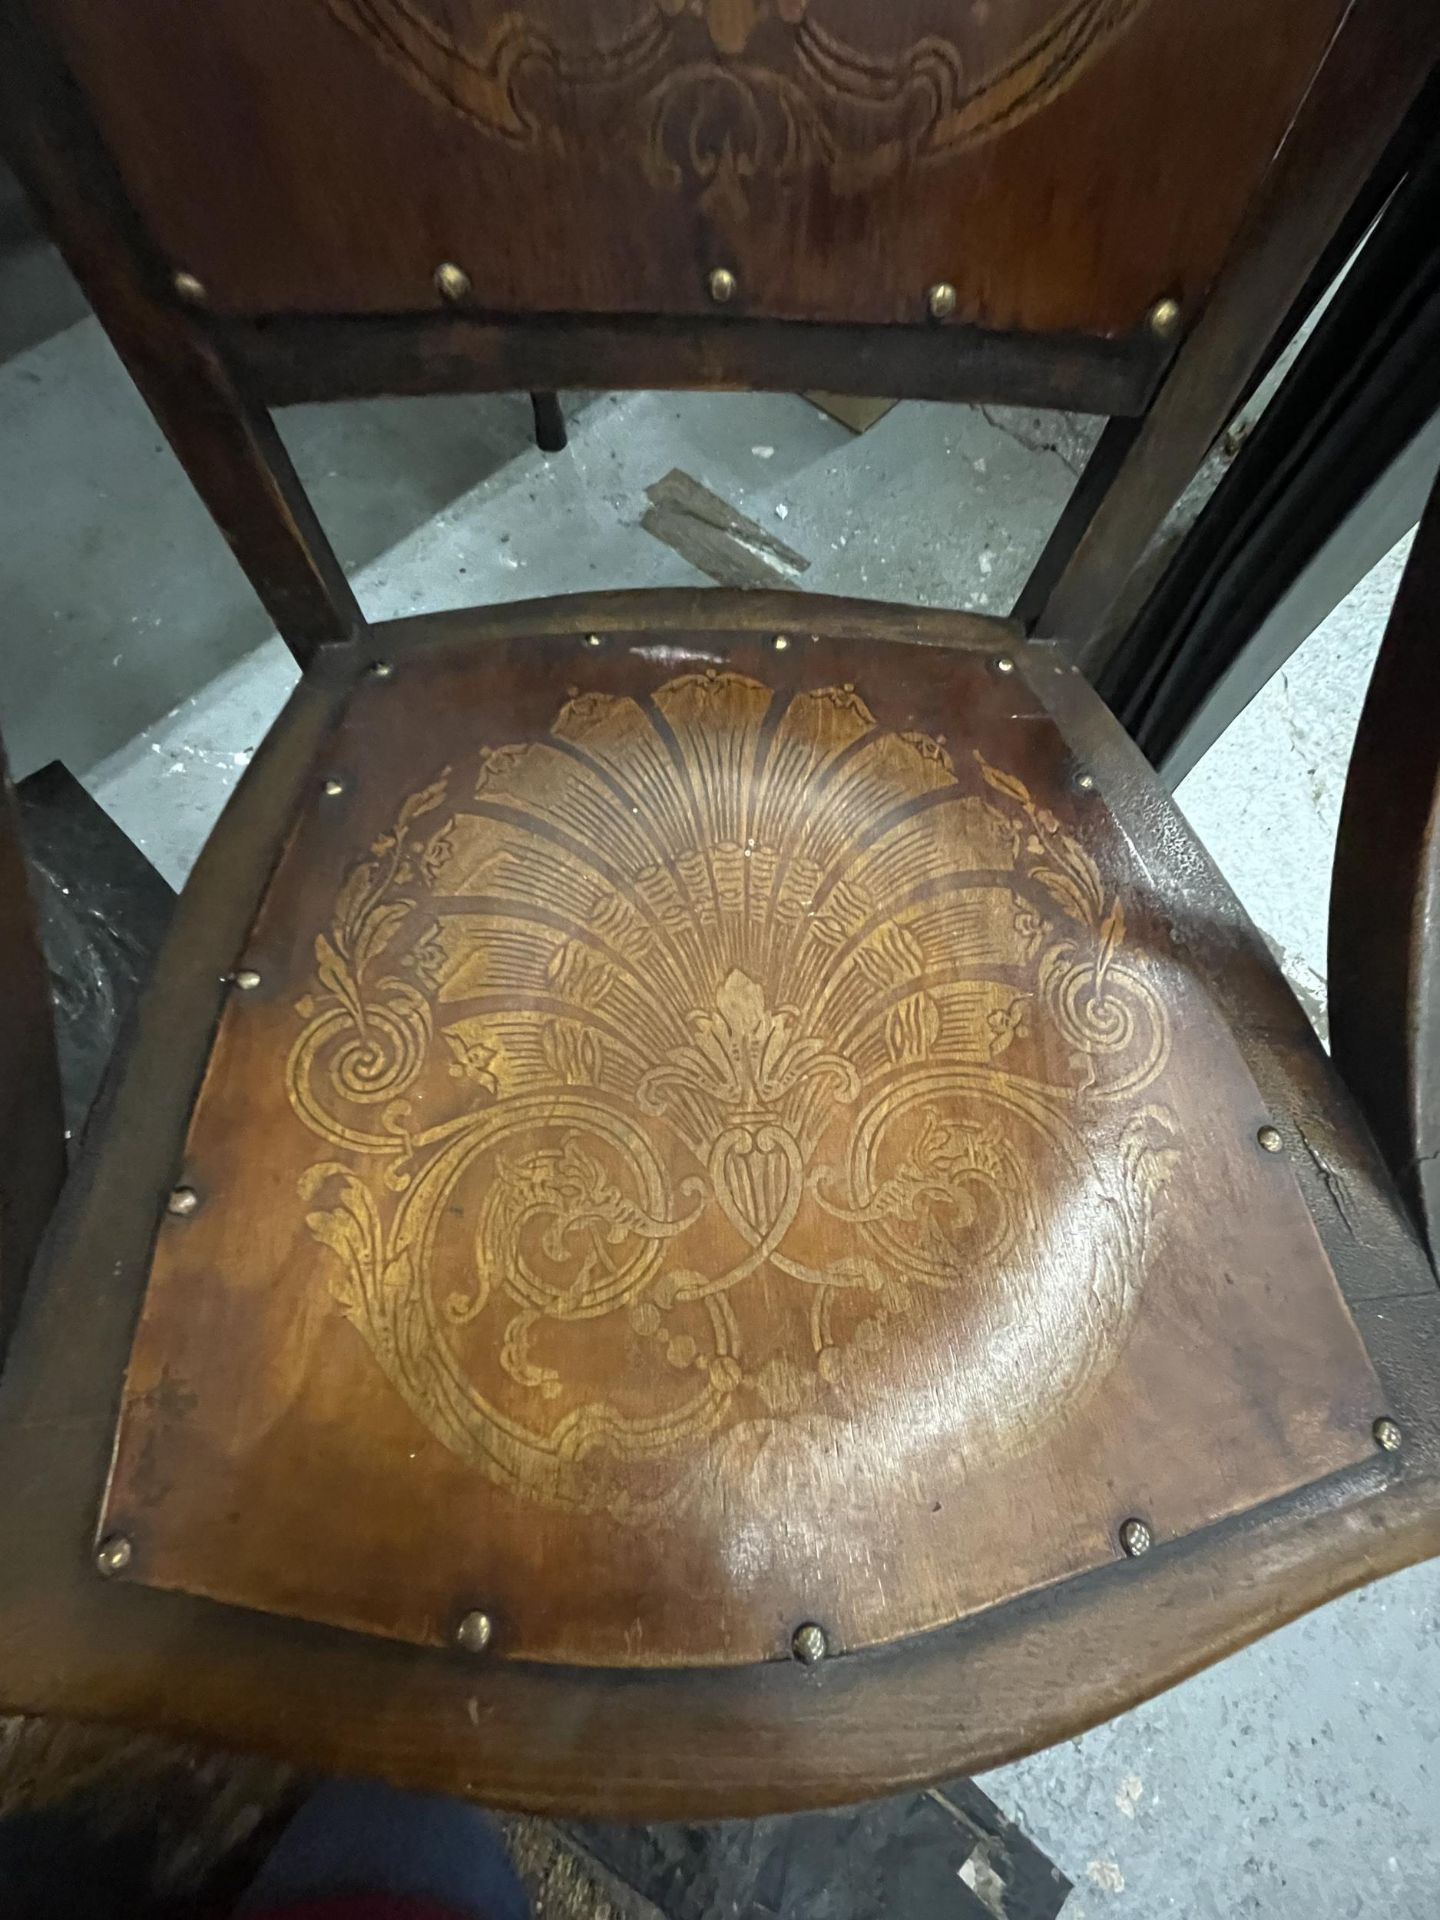 AN ART NOUVEAU CHAIR WITH FLORAL DESIGN SEAT AND BACK - Image 3 of 4